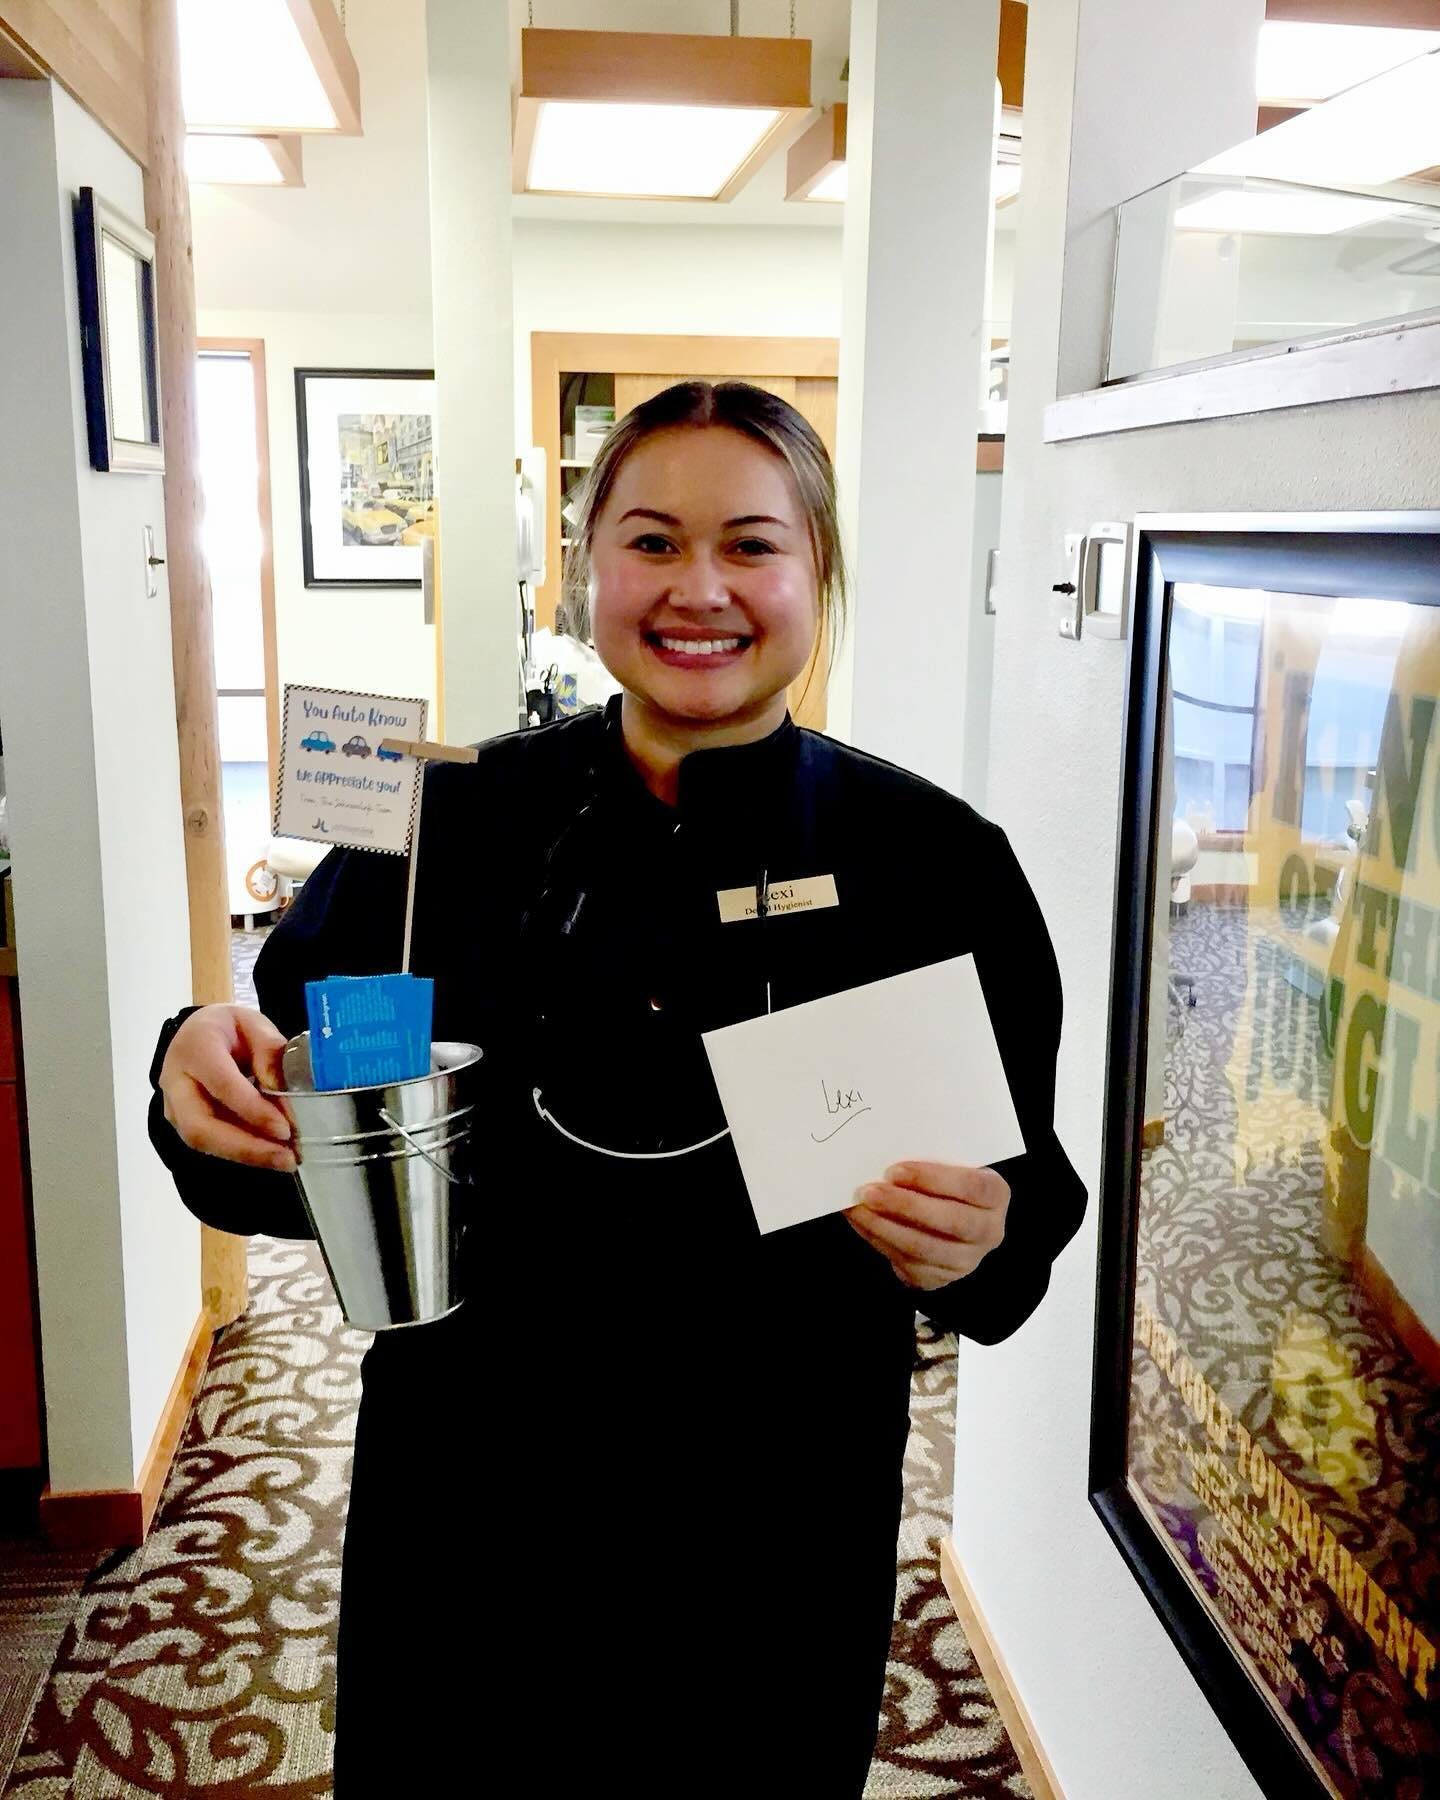 It takes a smile to make a smile 😁
&bull;
&bull;
&bull;
Thank you Lexi (at Poulsbo Dental Center) for helping our patients keep their amazing smiles healthy! 
#Invisalign #Johnsonlinkortho #hygienist #oralhygiene #Johnsonlinkorthodontics #Braces #Lo